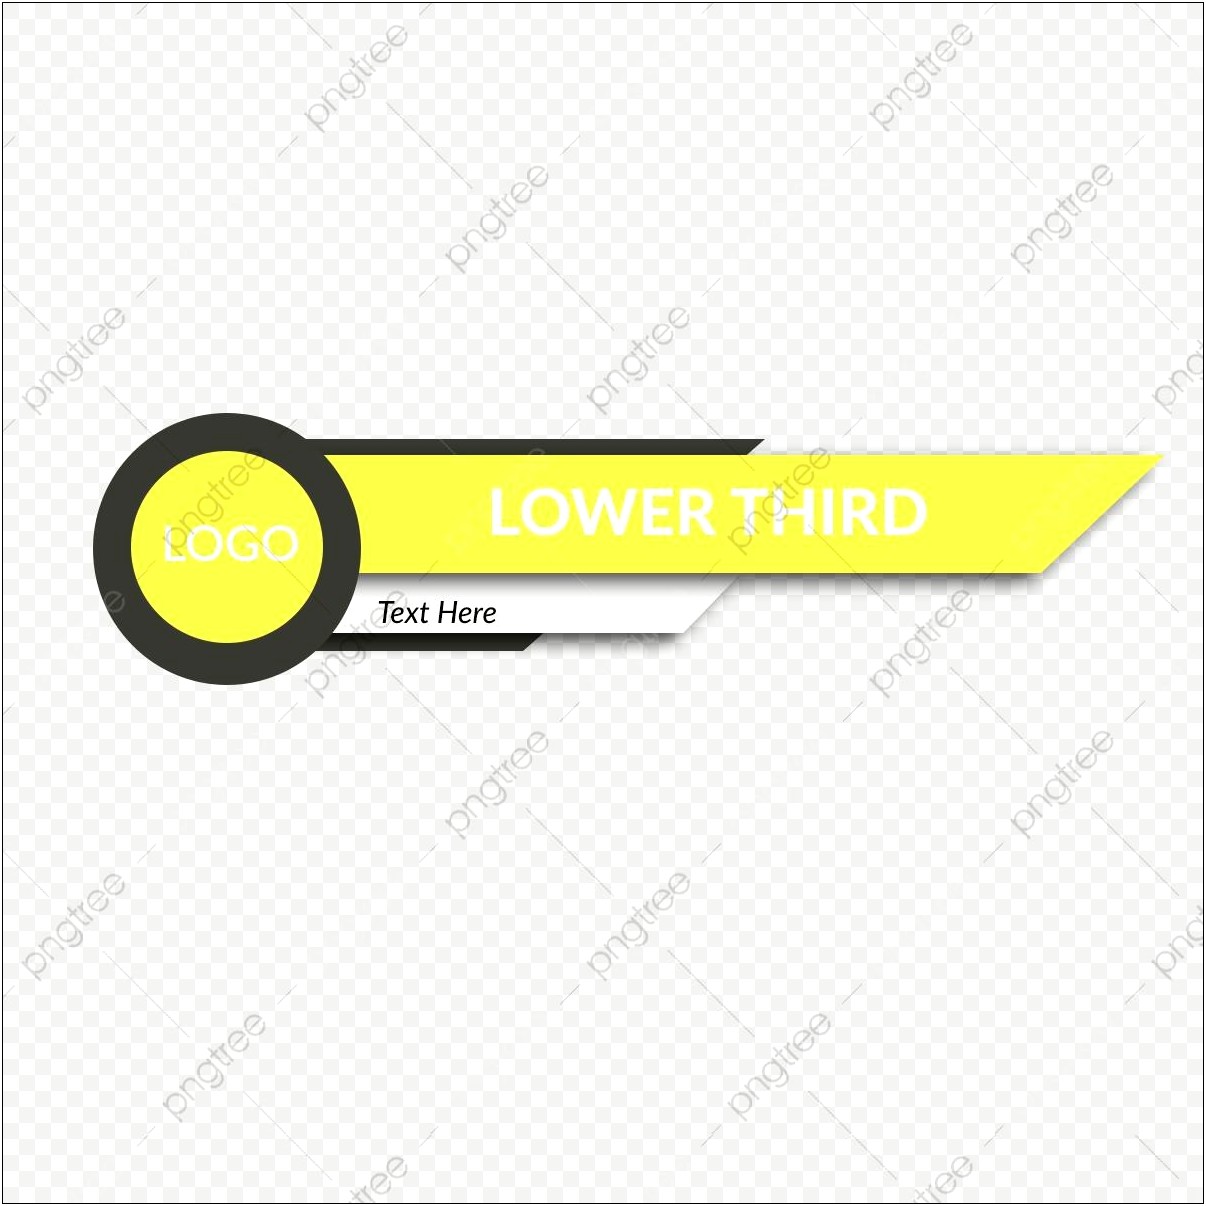 Lower Third Templates Png Clipart Free Download